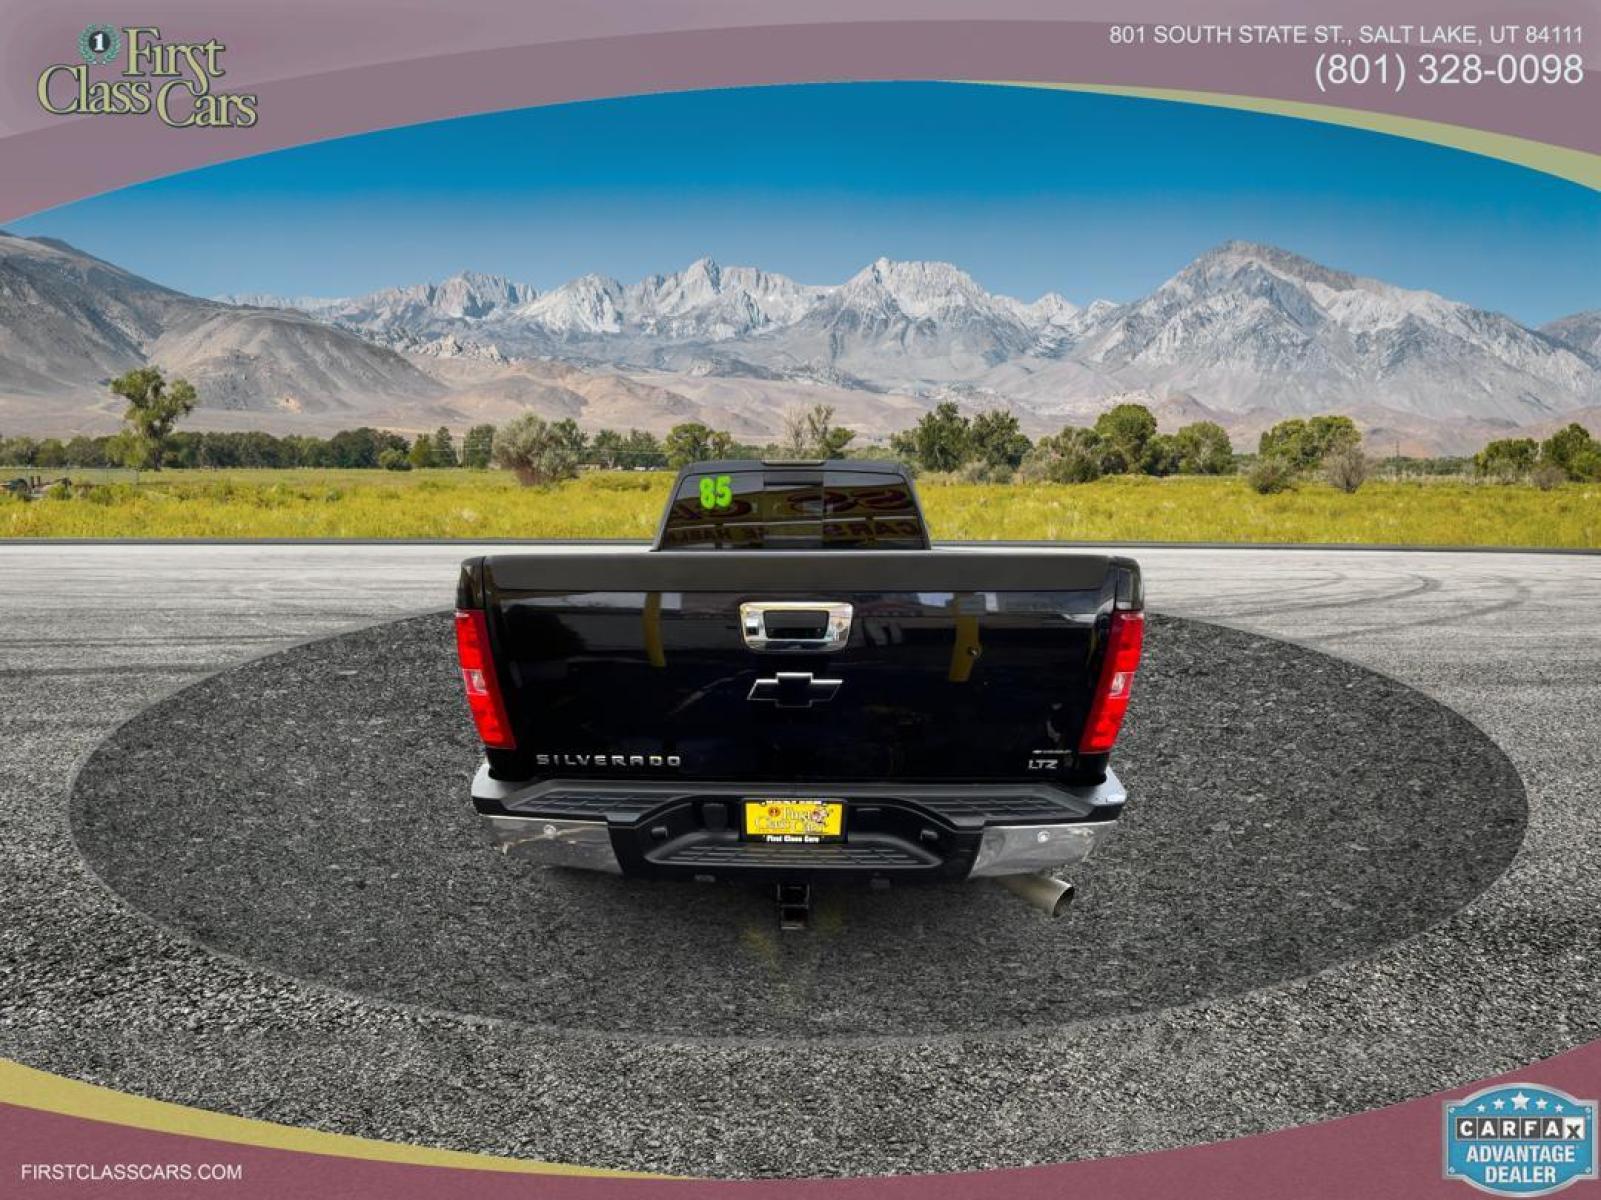 2012 Black /Black Chevrolet Silverado 3500HD (1GC4K1E81CF) , Allison Transmission transmission, located at 801 South State Street, Salt Lake City, UT, 84111, (801) 328-0098, 40.751953, -111.888206 - 3500HD LTZ DURAMAX DIESEL 6.6L, Loaded with features, 4x4, ALLISON TRANSMISSION, GREAT TIRES, BED LINER, LEATHER SEATS, BACKUP CAMERA, POWER SEATS, POWER LOCKS, POWER WINDOWS, Parking Sensors, AM/FM Aux input, Blutooth, GPS Navigation system, Rear Entertainment system, - Photo #4